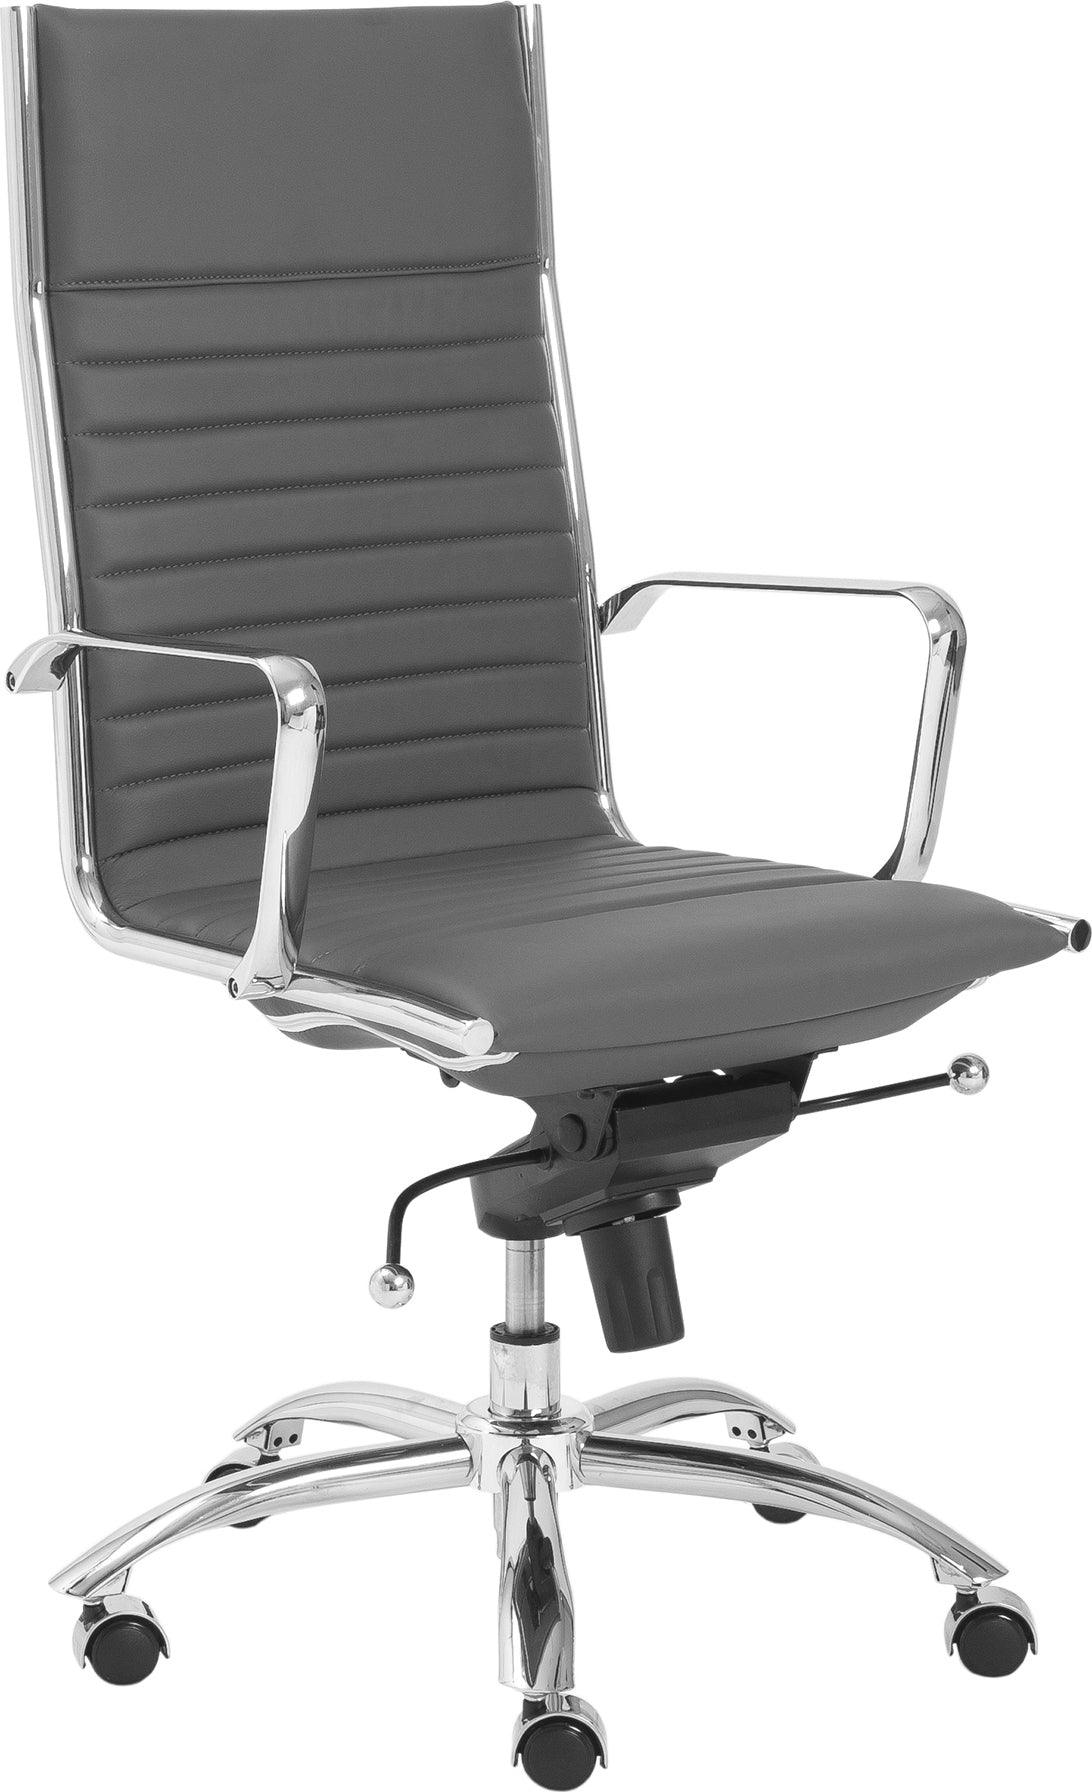 Euro Style Task Chairs - Dirk High Back Office Chair Gray